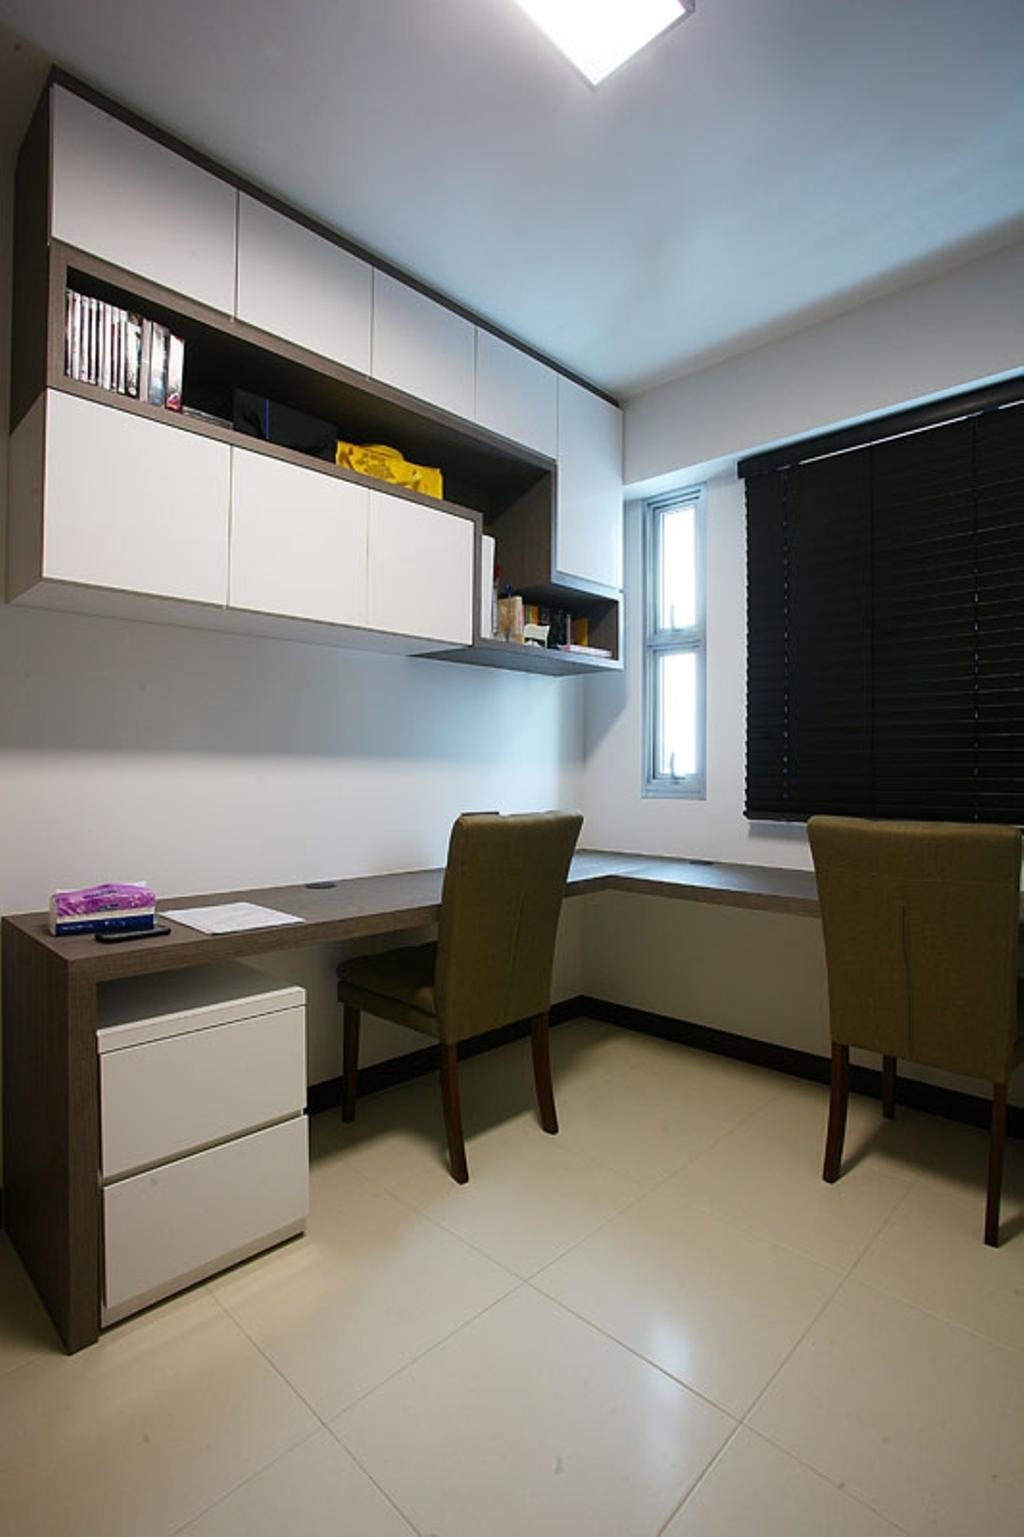 Transitional, HDB, Study, Buangkok Green, Interior Designer, Fineline Design, Study Table, Table, Chairs, Storage, Shelves, Shelving, Wall Shelf, Storage Space, Blinds, Roller Blinds, Chair, Furniture